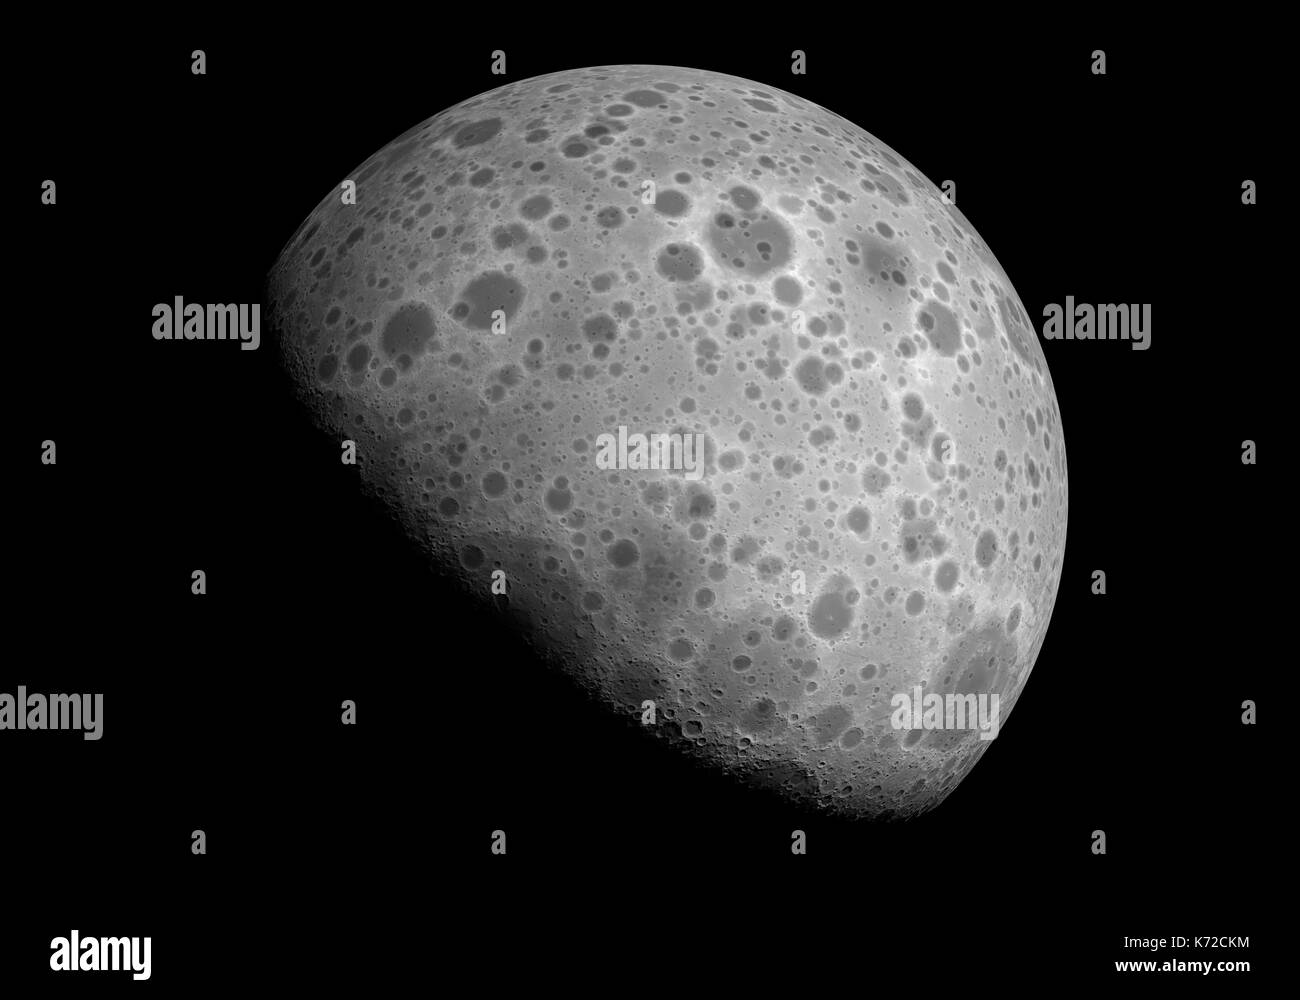 Hypothetical vision of the hidden side of the moon. High resolution 3D rendering. Stock Photo